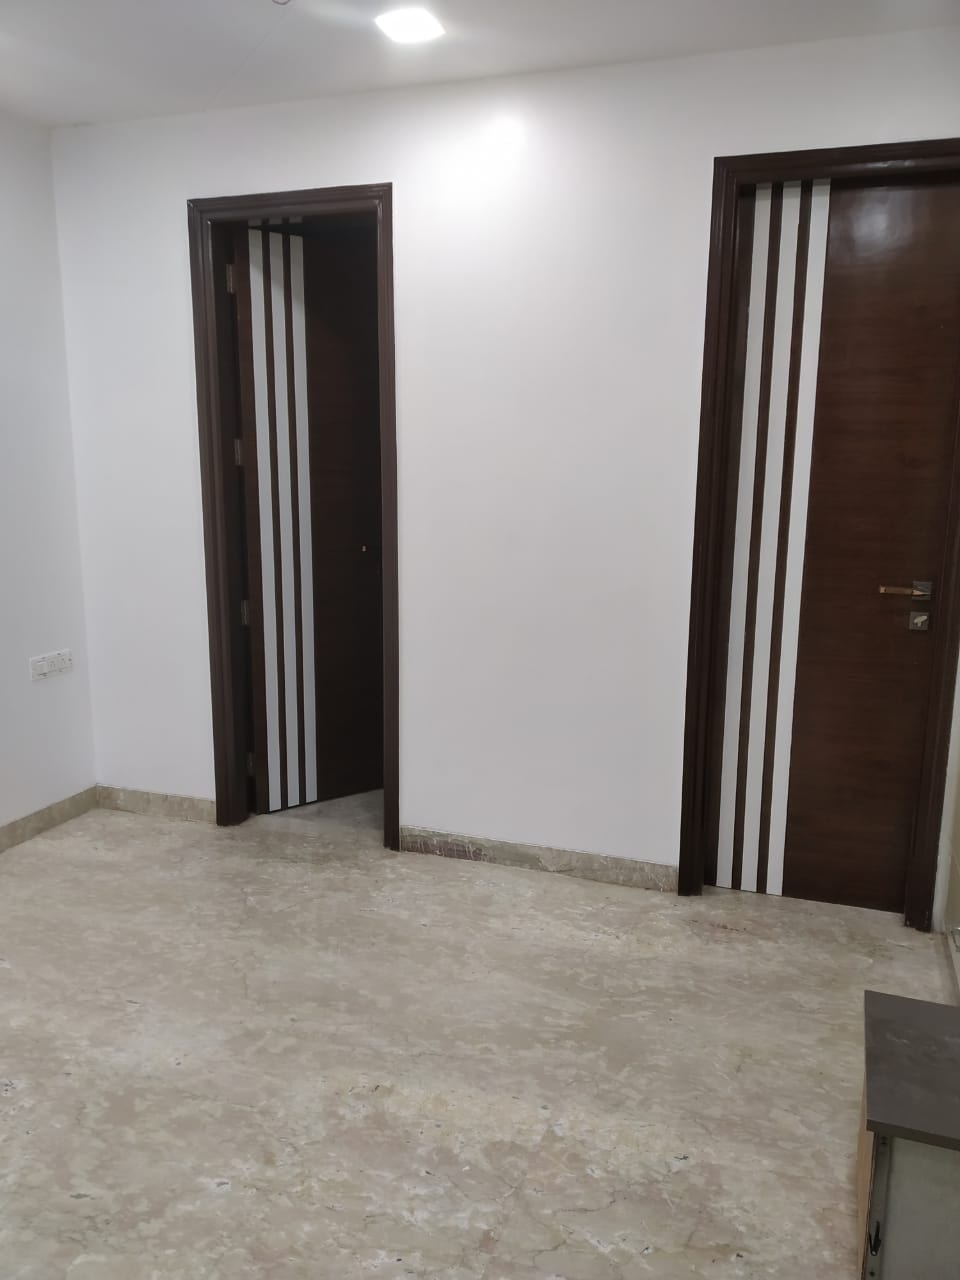 3BHK FREE HOLD PREPERTY IN ROHINI